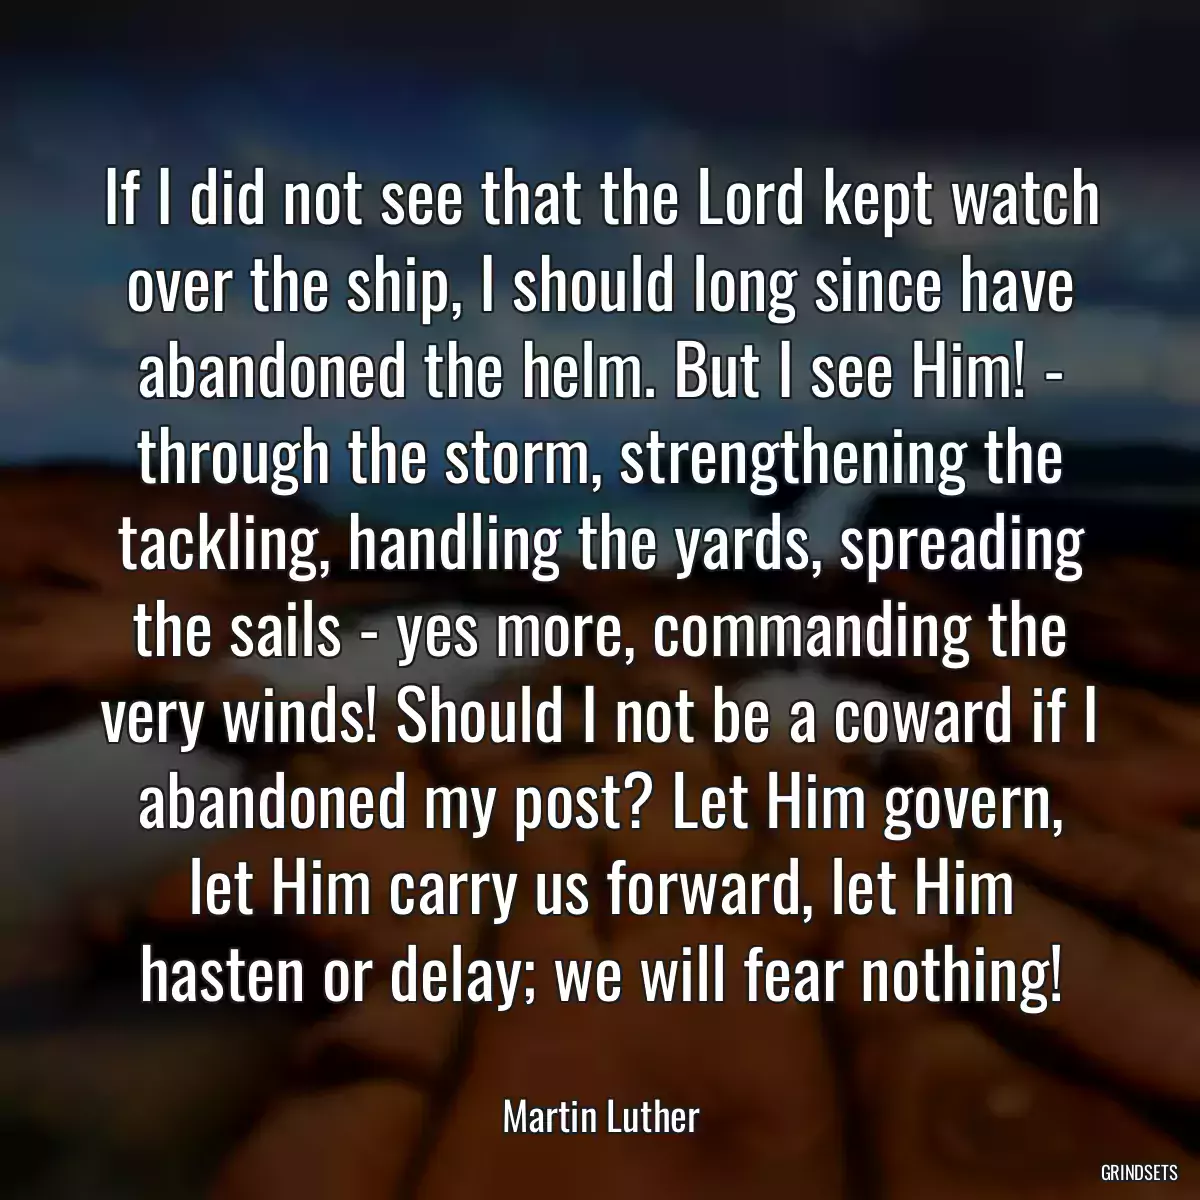 If I did not see that the Lord kept watch over the ship, I should long since have abandoned the helm. But I see Him! - through the storm, strengthening the tackling, handling the yards, spreading the sails - yes more, commanding the very winds! Should I not be a coward if I abandoned my post? Let Him govern, let Him carry us forward, let Him hasten or delay; we will fear nothing!